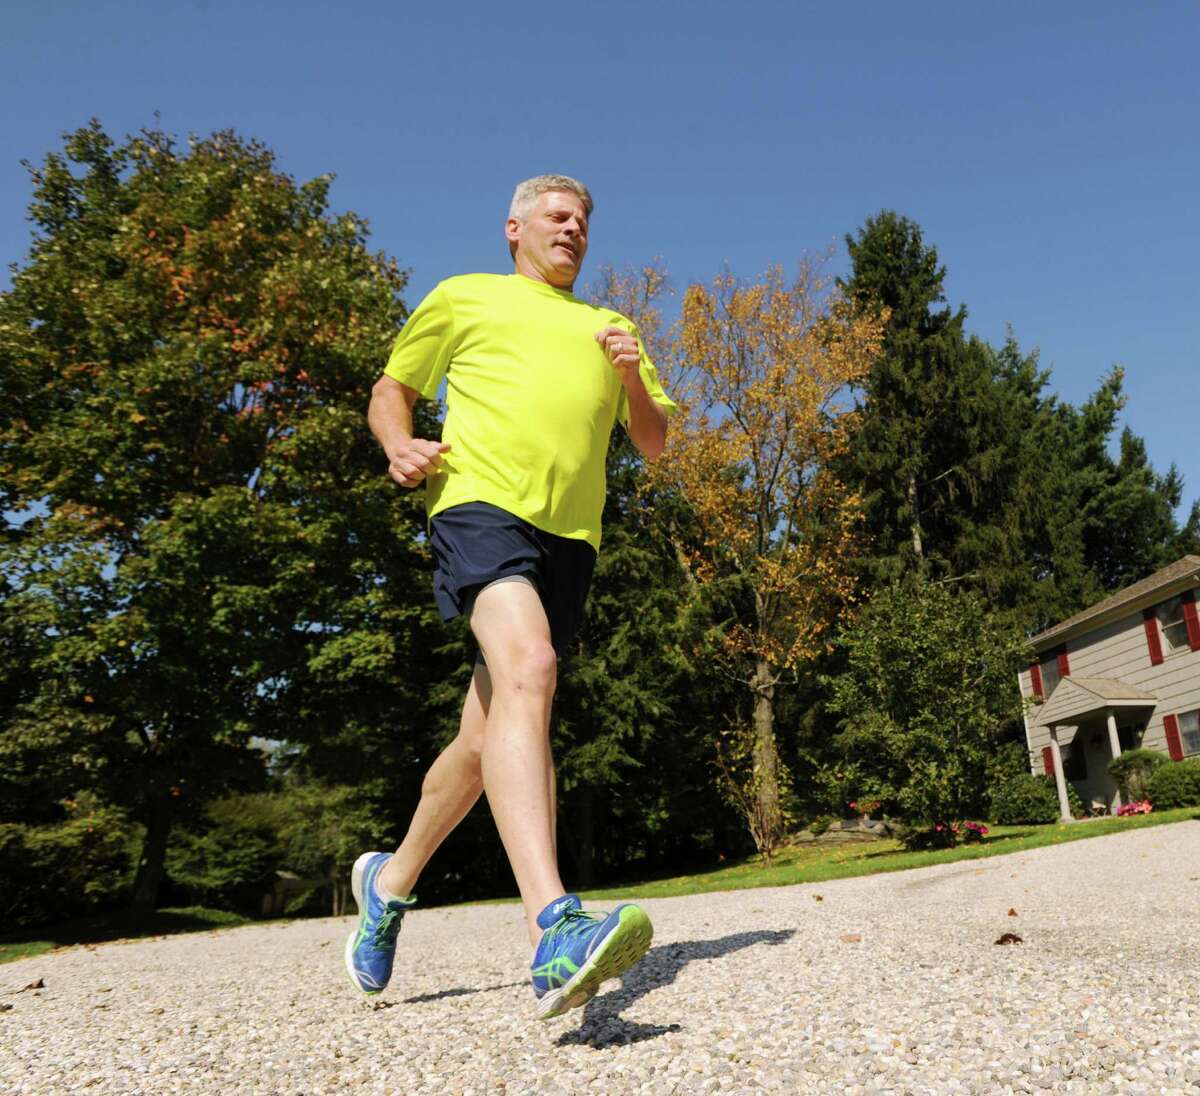 John McCarthy runs on the driveway of his Round Hill Road in Greenwich, Friday afternoon, Oct. 5, 2012. McCarthy will be running in the ING New York City Marathon Nov. 4 to raise money for the Hole in the Wall Gang Camp, a camp for kids with cancer and serious blood diseases that his son, Jeremiah, a cancer survivor, attended.